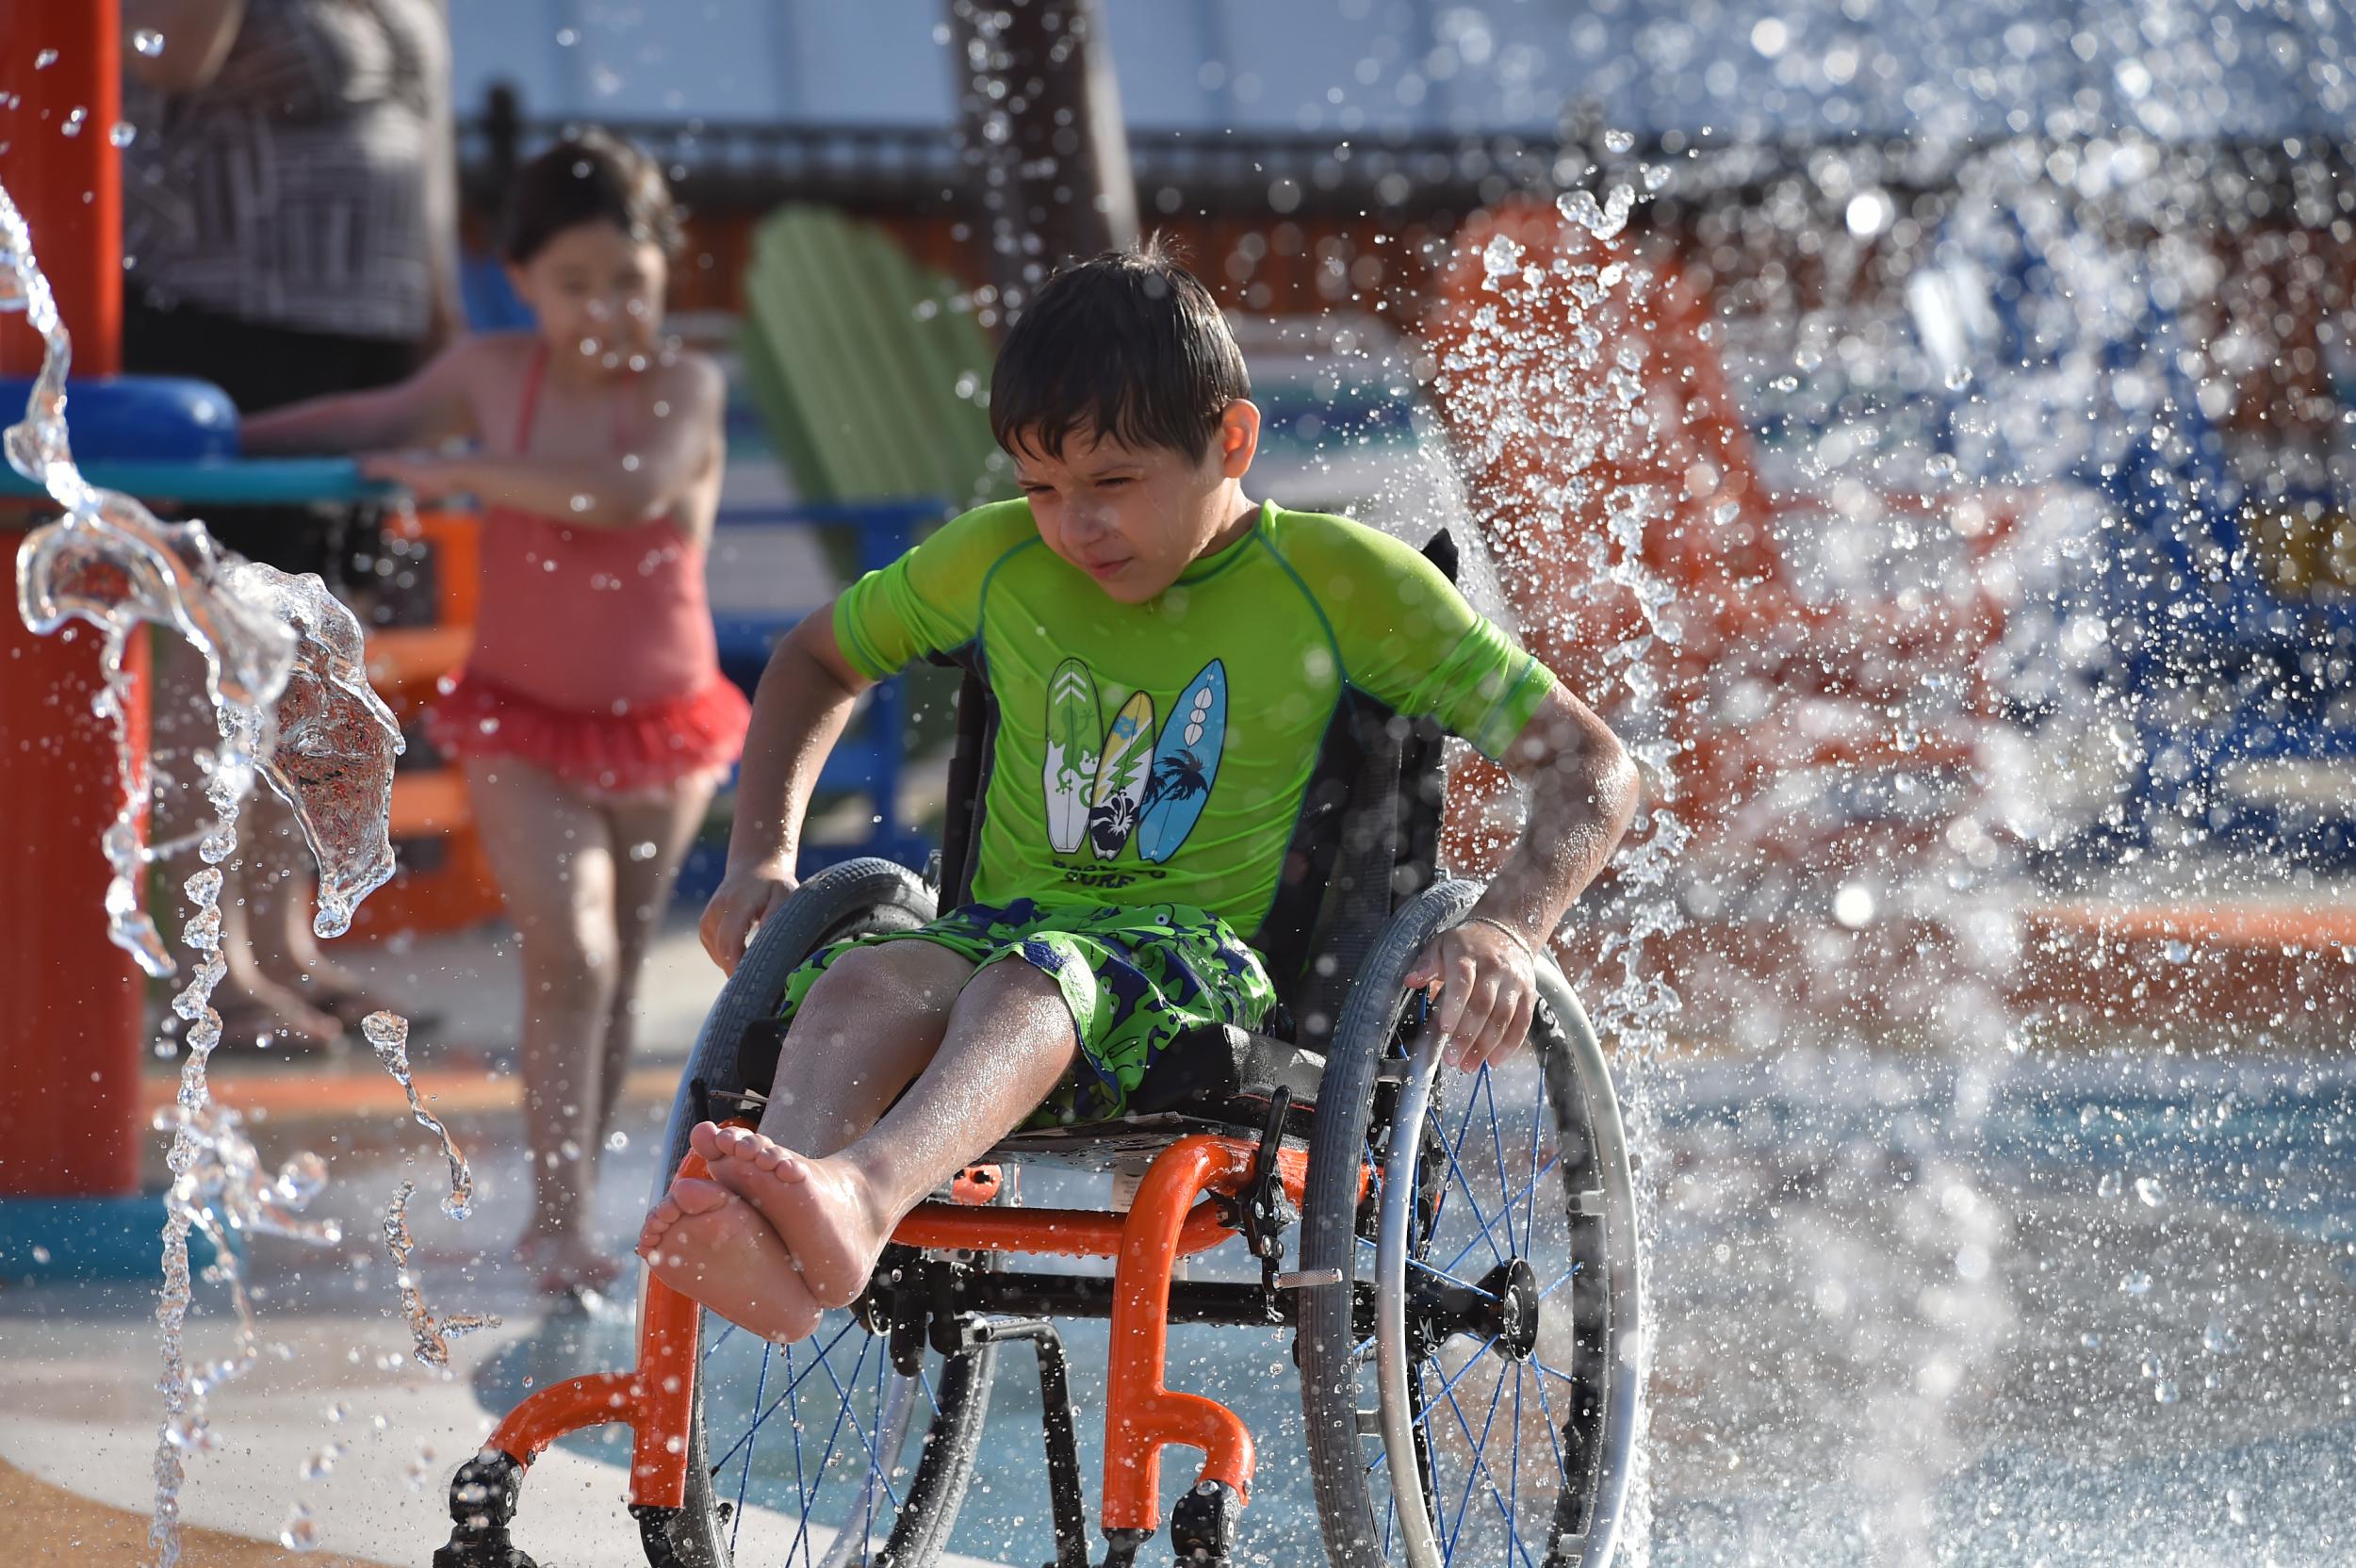 The park offers waterproof wheelchairs free of charge to visitors